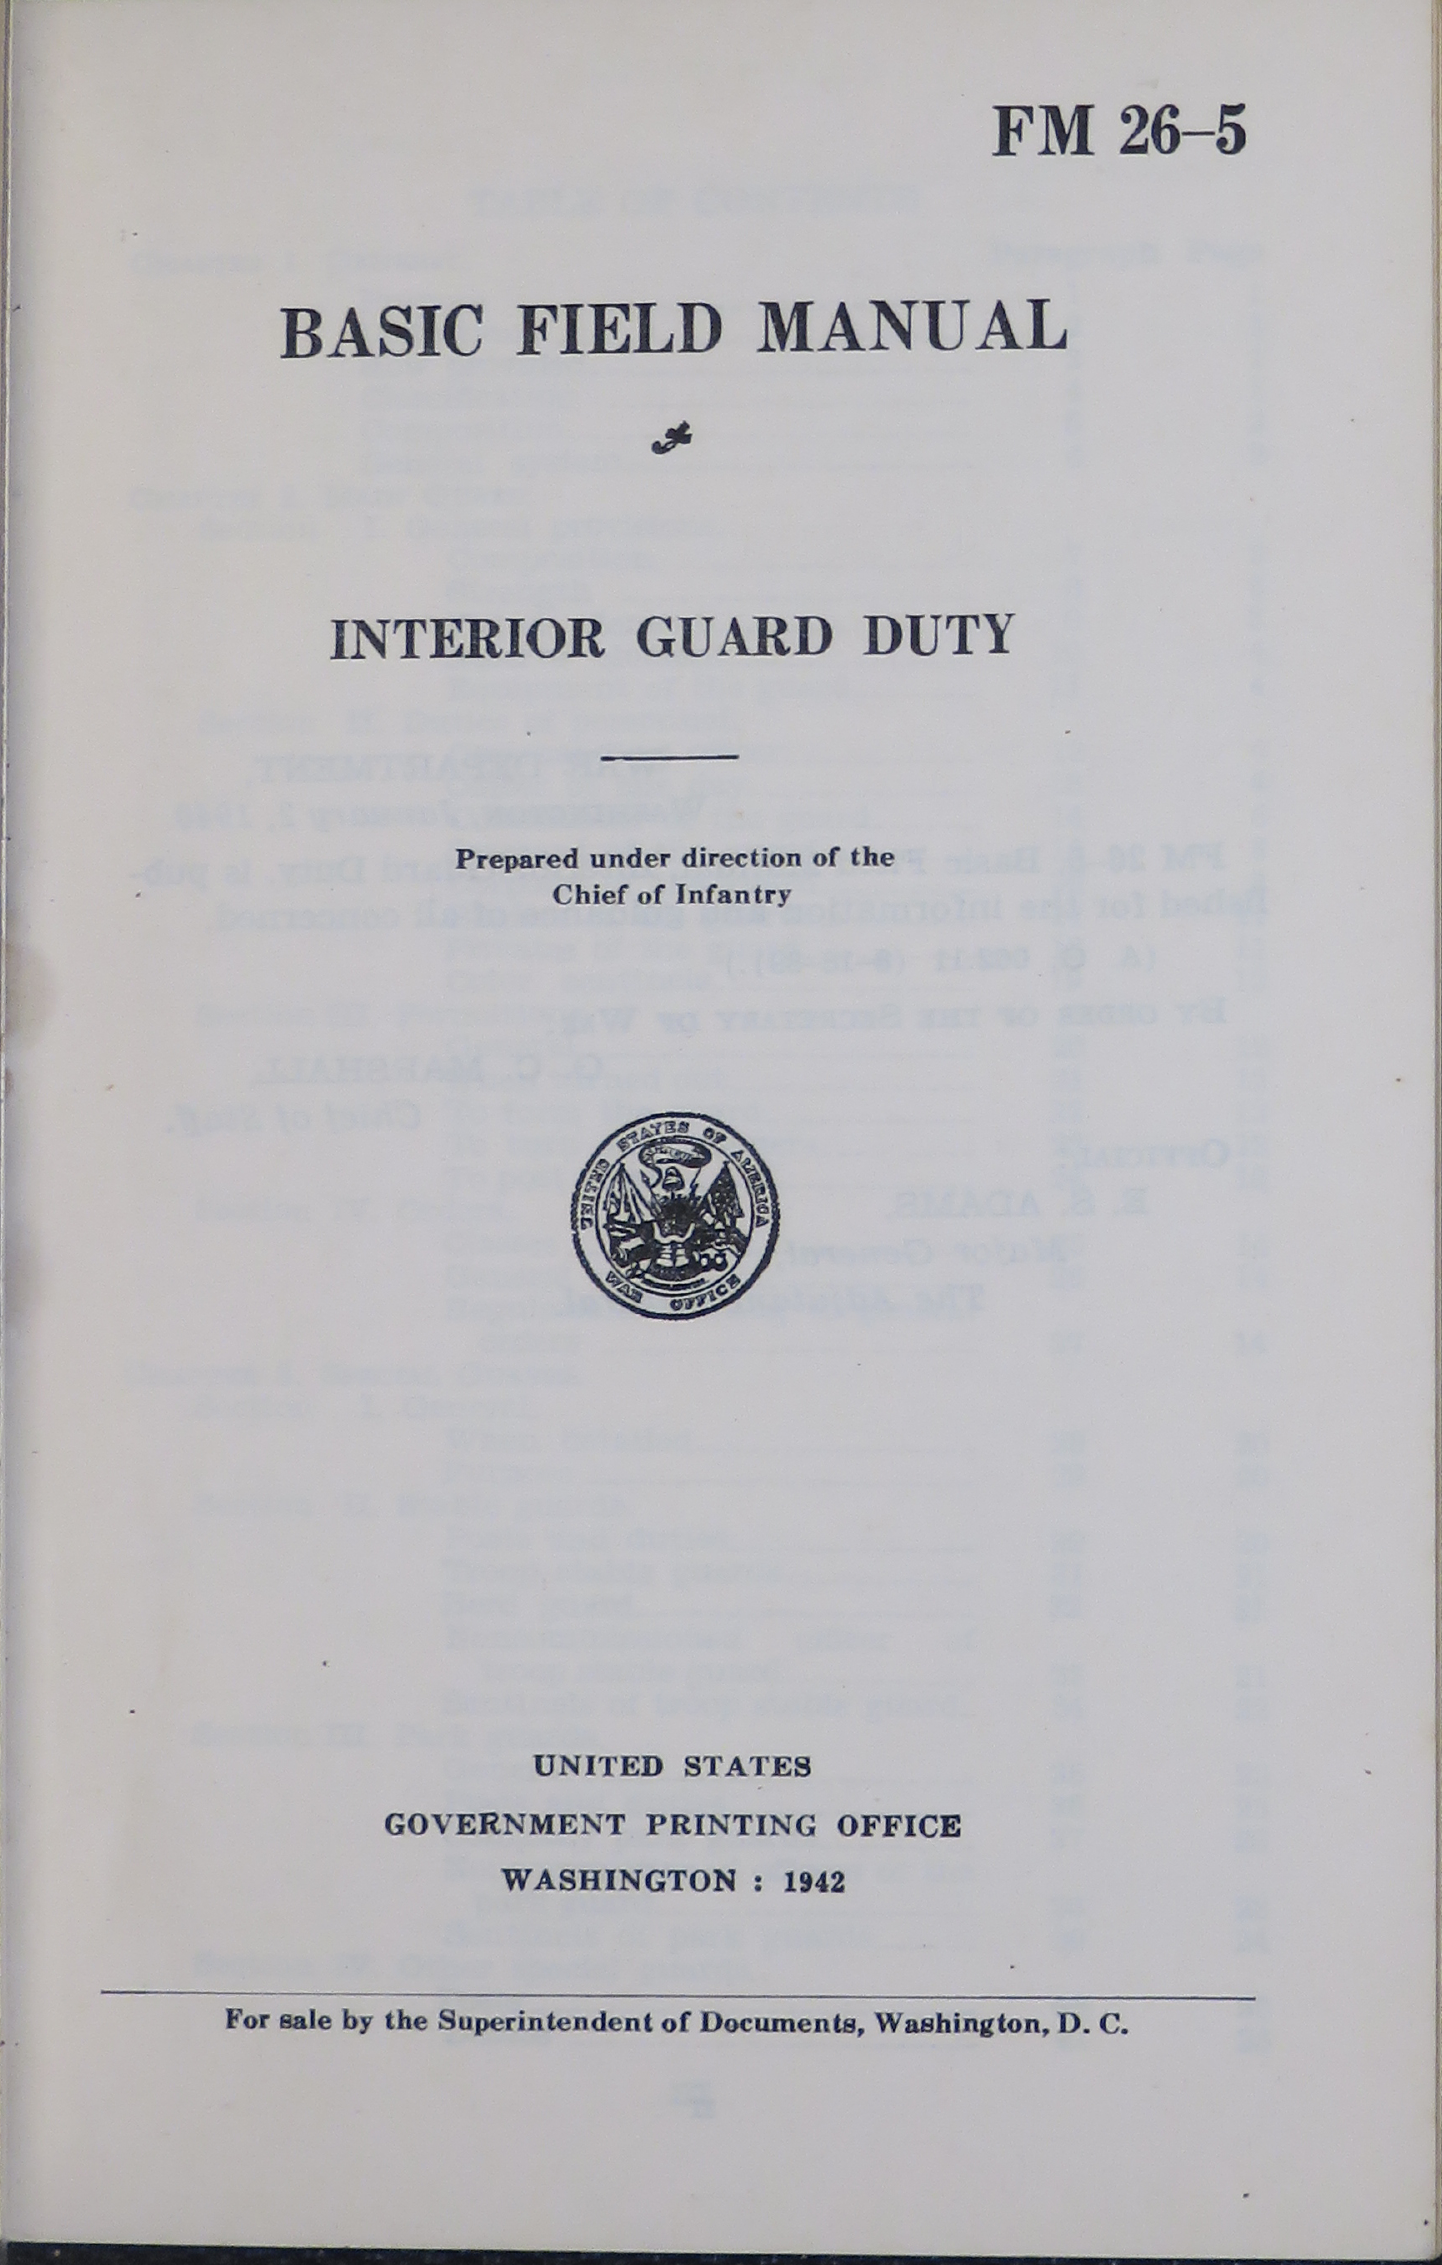 Sample page 3 from AirCorps Library document: Basic Field Manual for Interior Guard Duty